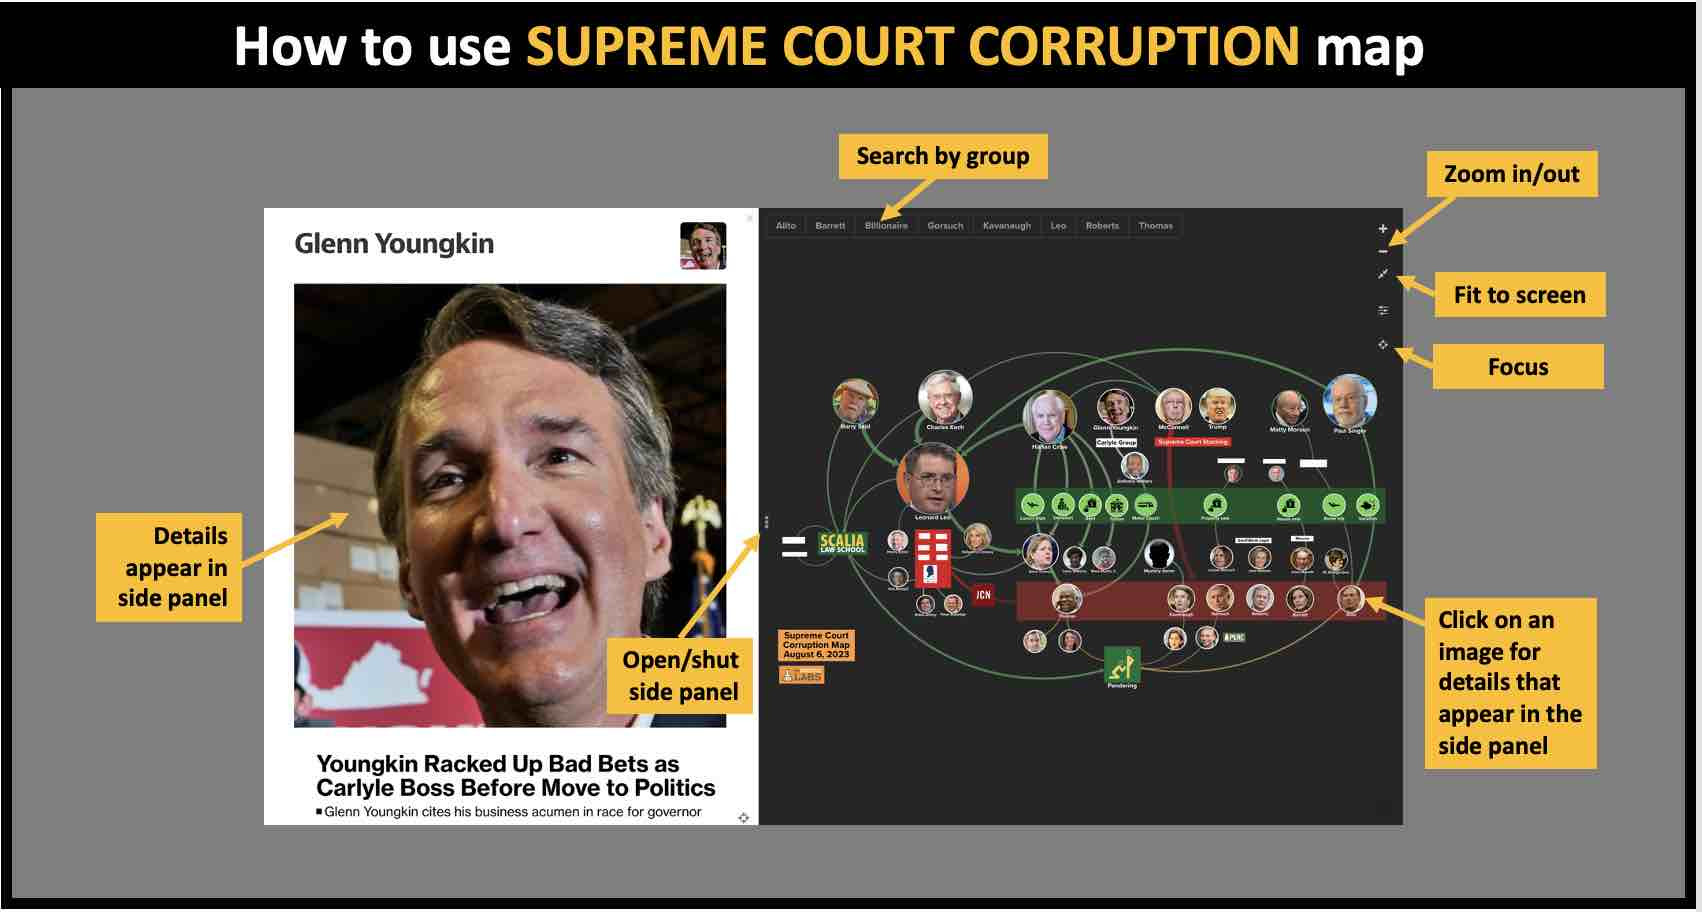 How to use the Supreme Court corruption map